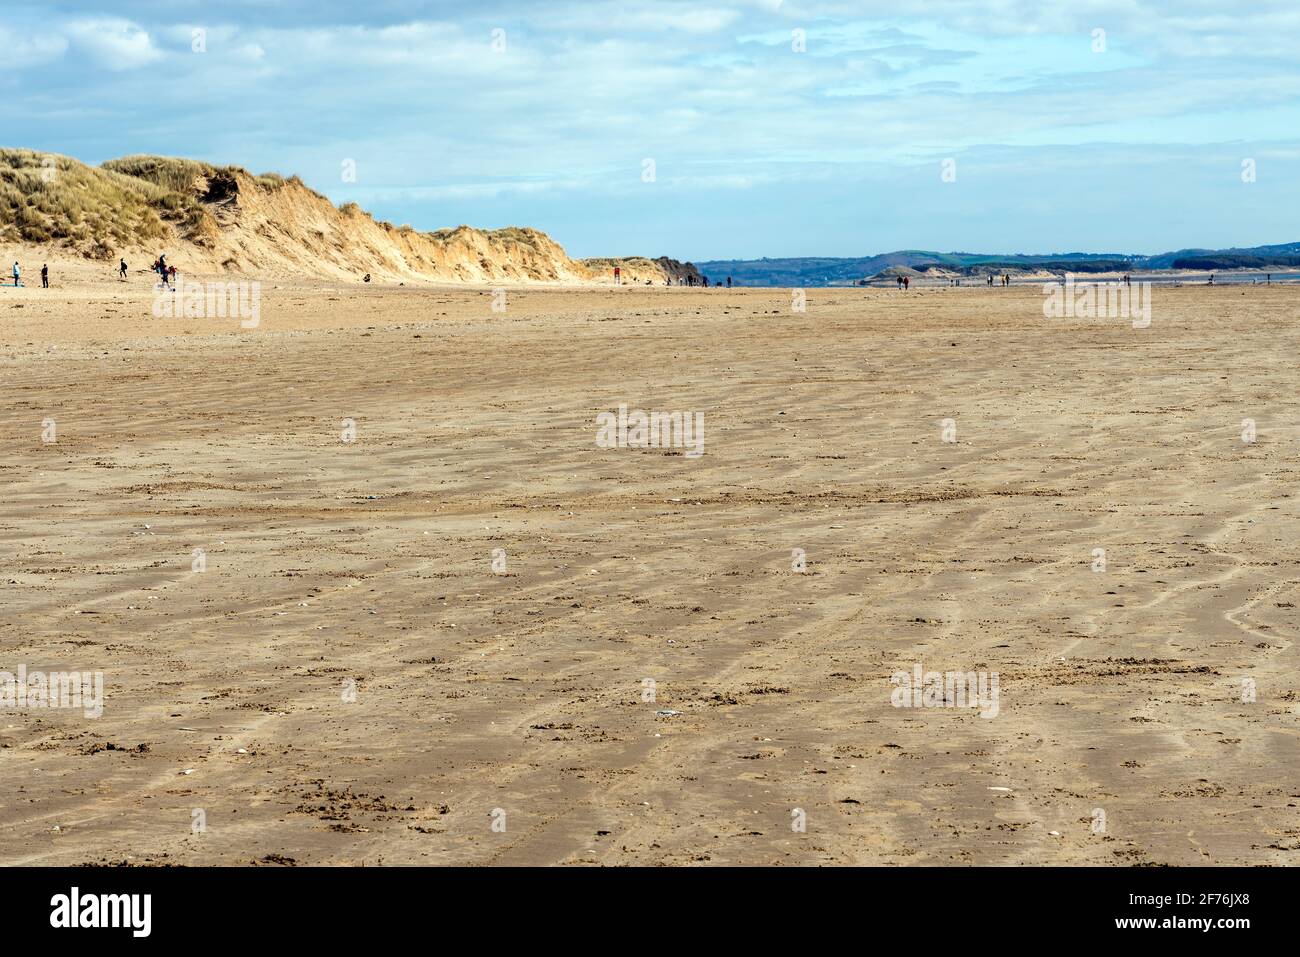 Cefn Sands beach at Pembrey Country Park in Carmarthenshire South Wales UK, which is a popular Welsh tourist travel resort and coastline landmark, sto Stock Photo